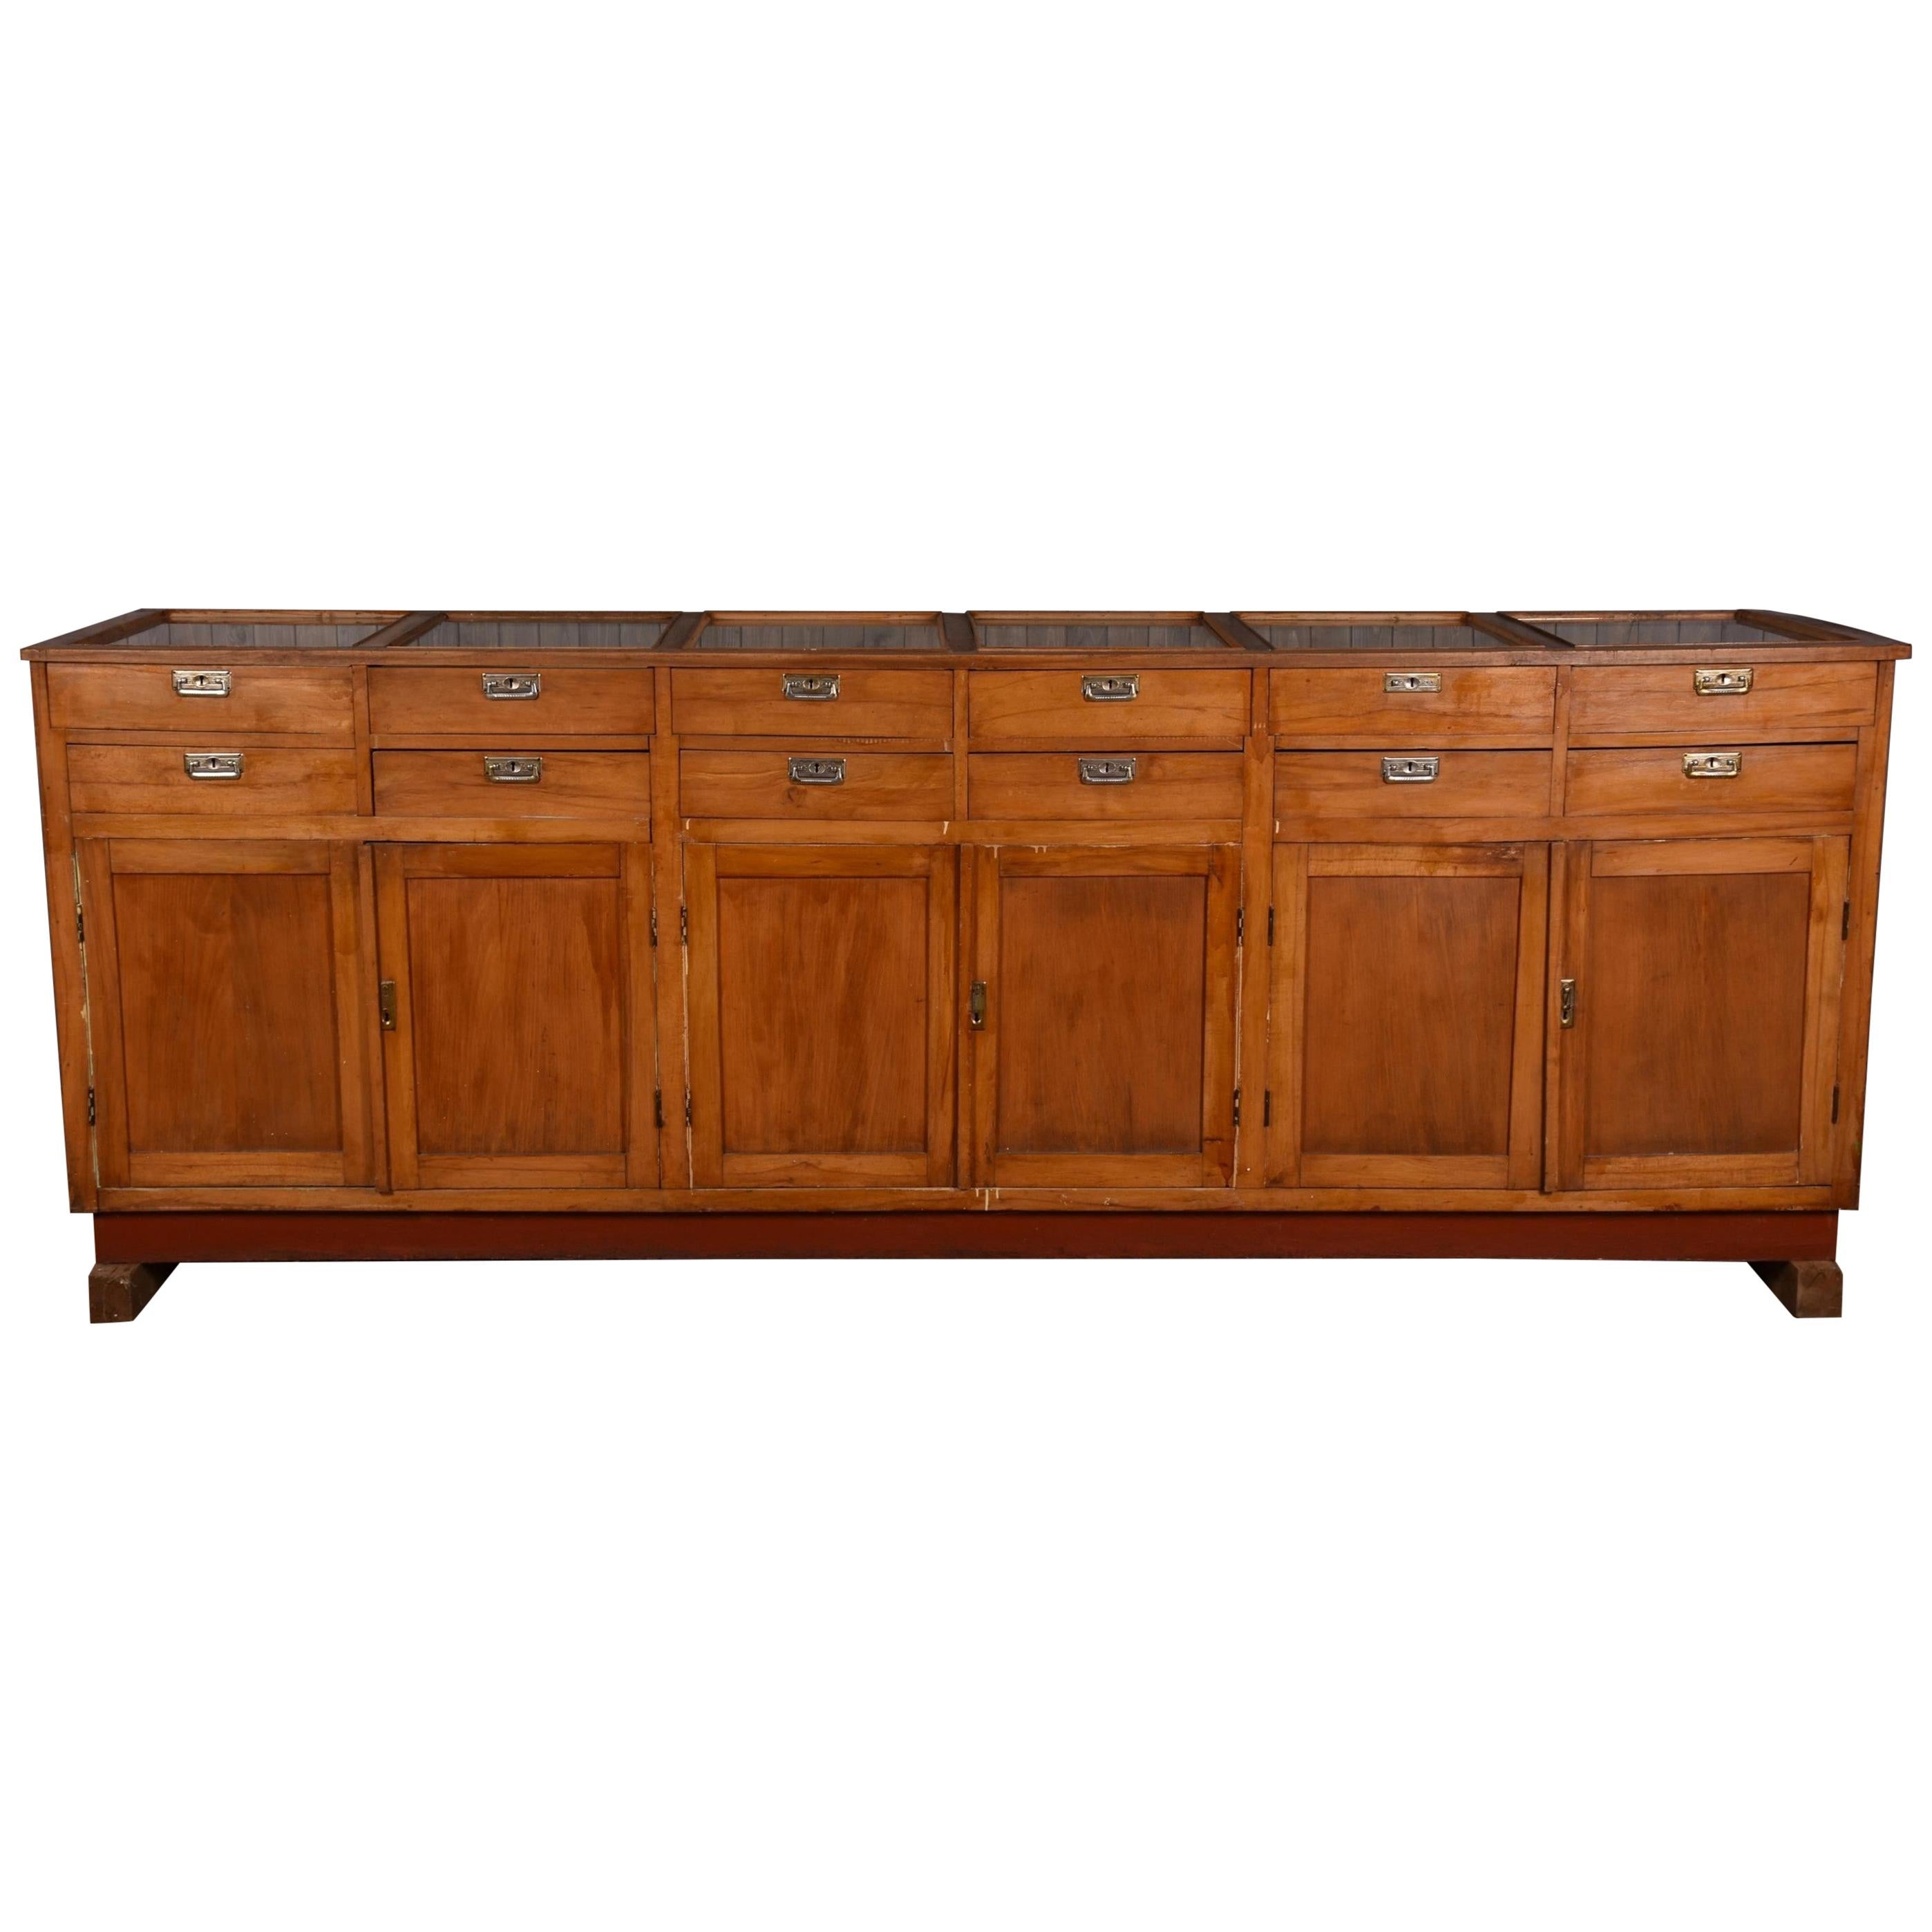 Apothecary no.13

Apothecary haberdashery display counter sideboard circa 1930s number 13

Apothecary / pharmacy / chemist / shop display / restaurant cabinet, circa 1930s

Apothecary pharmacy beech display cabinet dating to circa 1930s, This